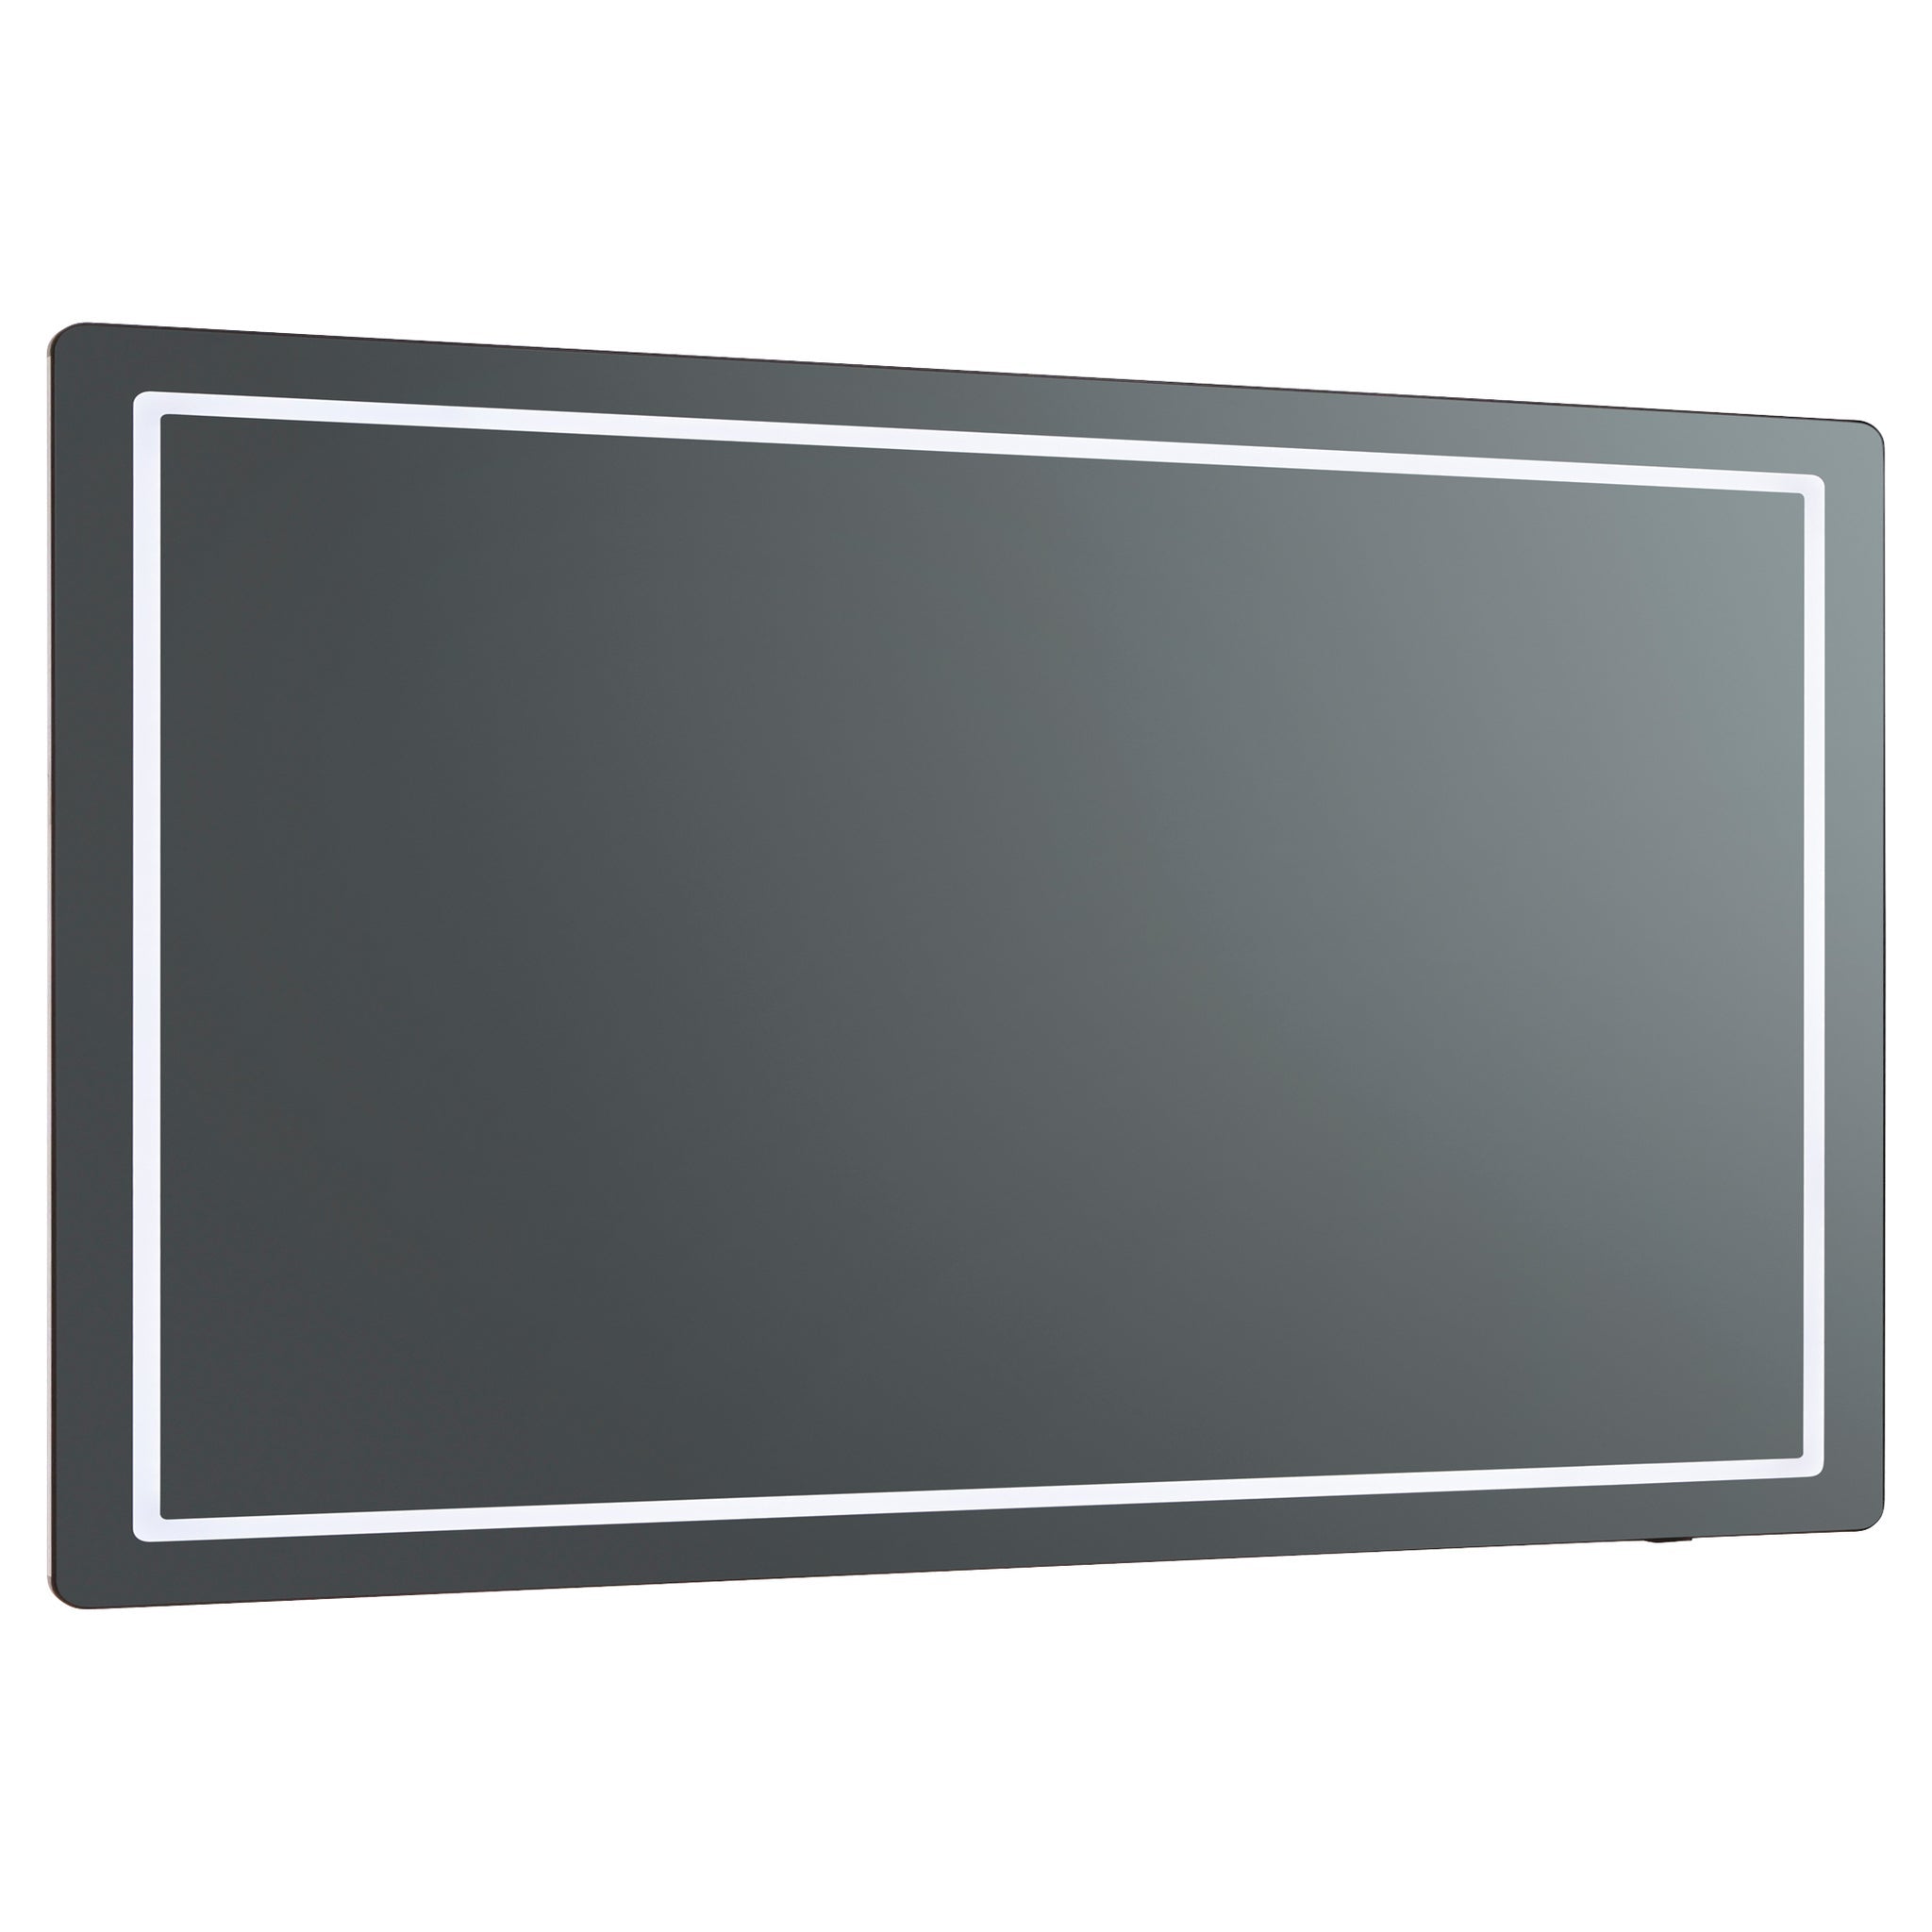 Oxygen COMPACT 3-0405-15 LED Lighted Mirror 60x42 Inch - Black